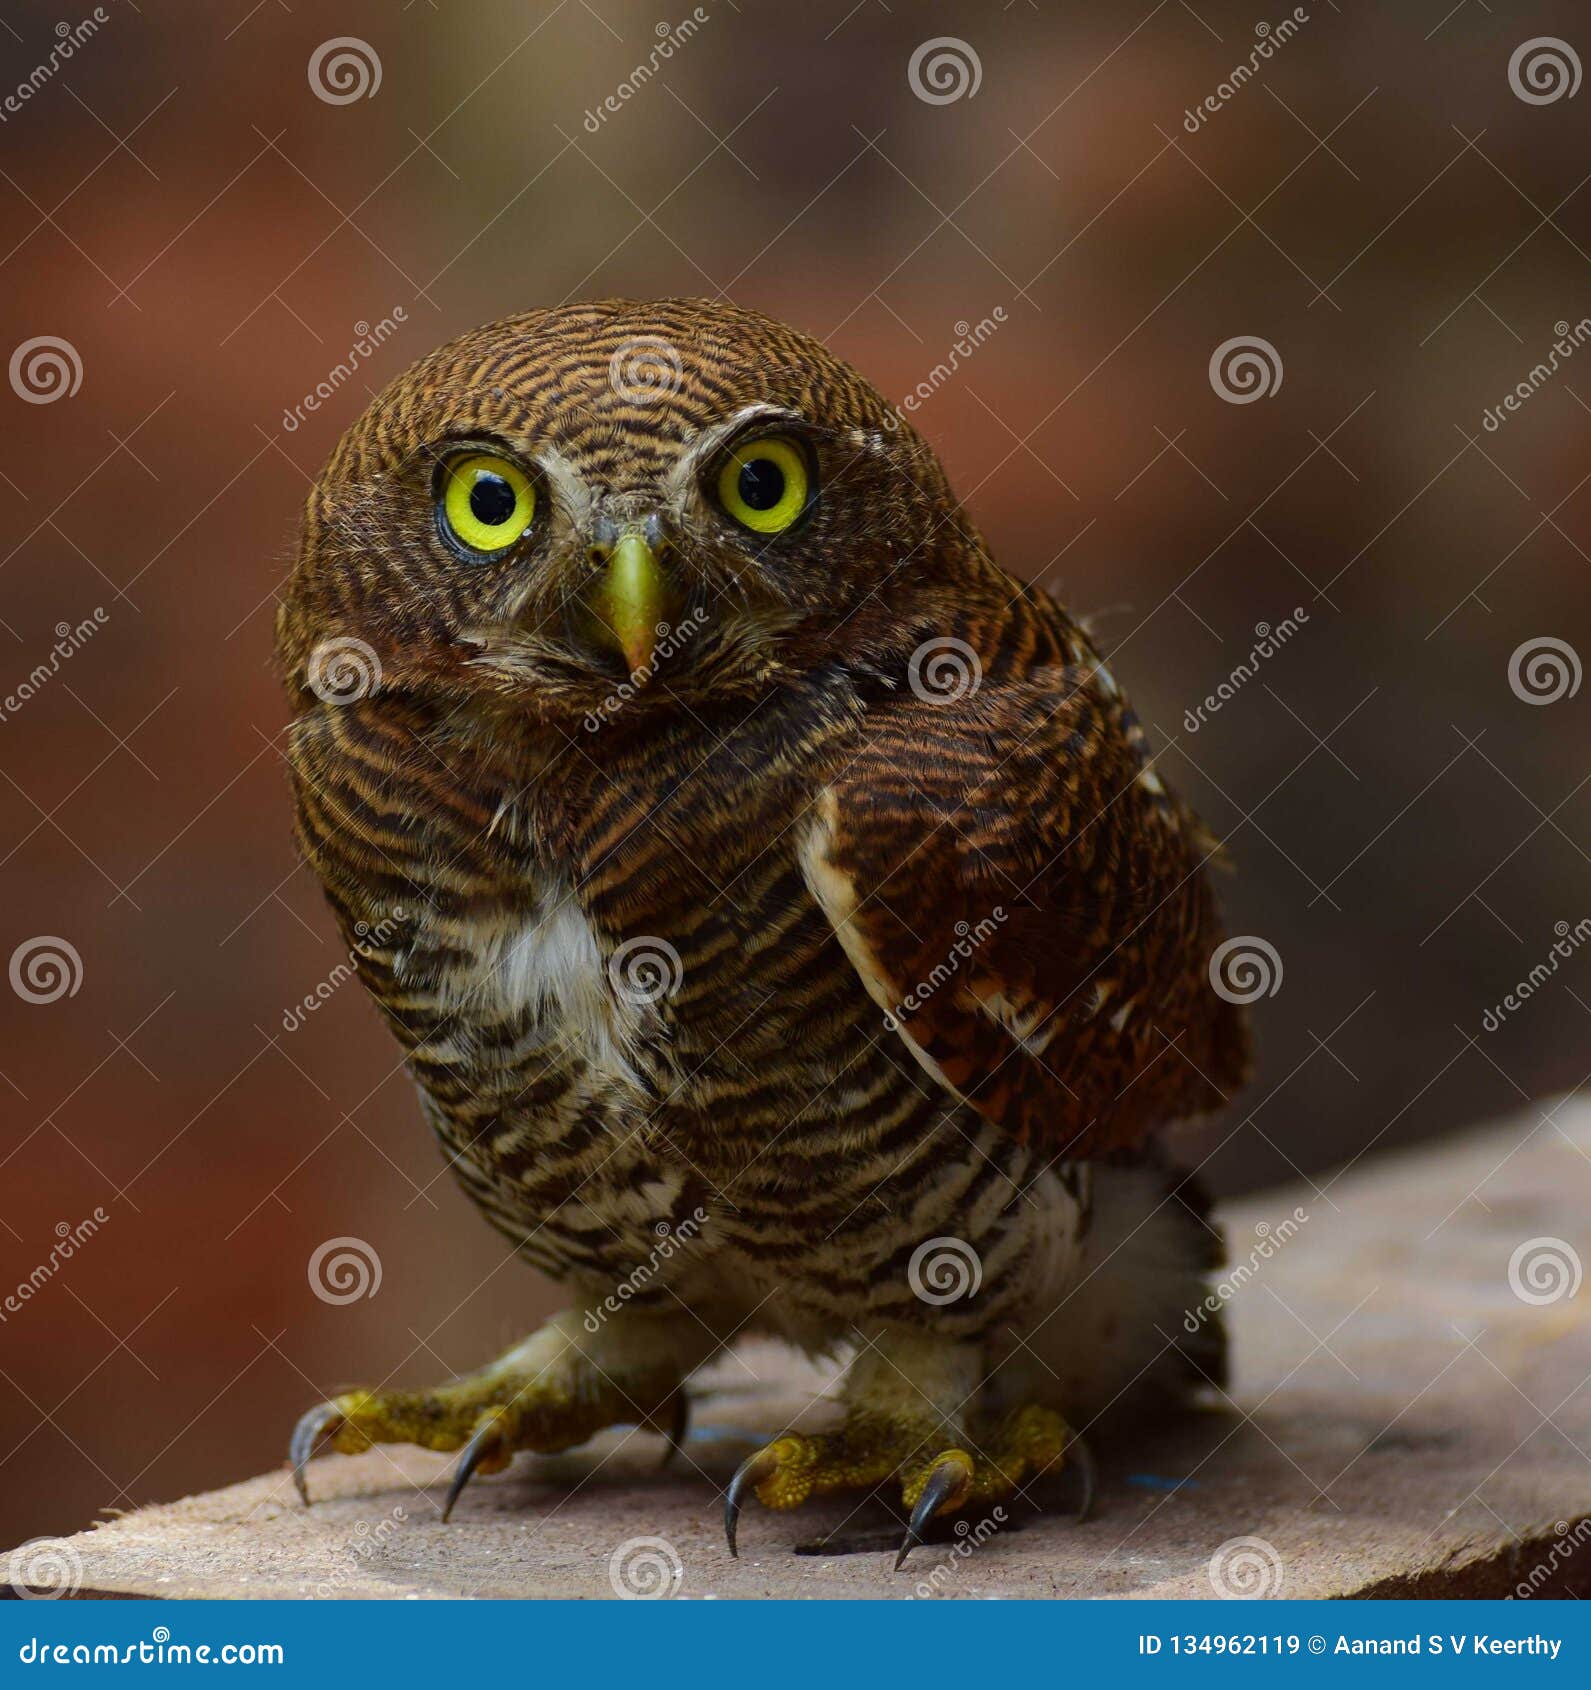 An Owl with Terrifying Eyes Stock Image - Image of hunt, terrifying:  134962119